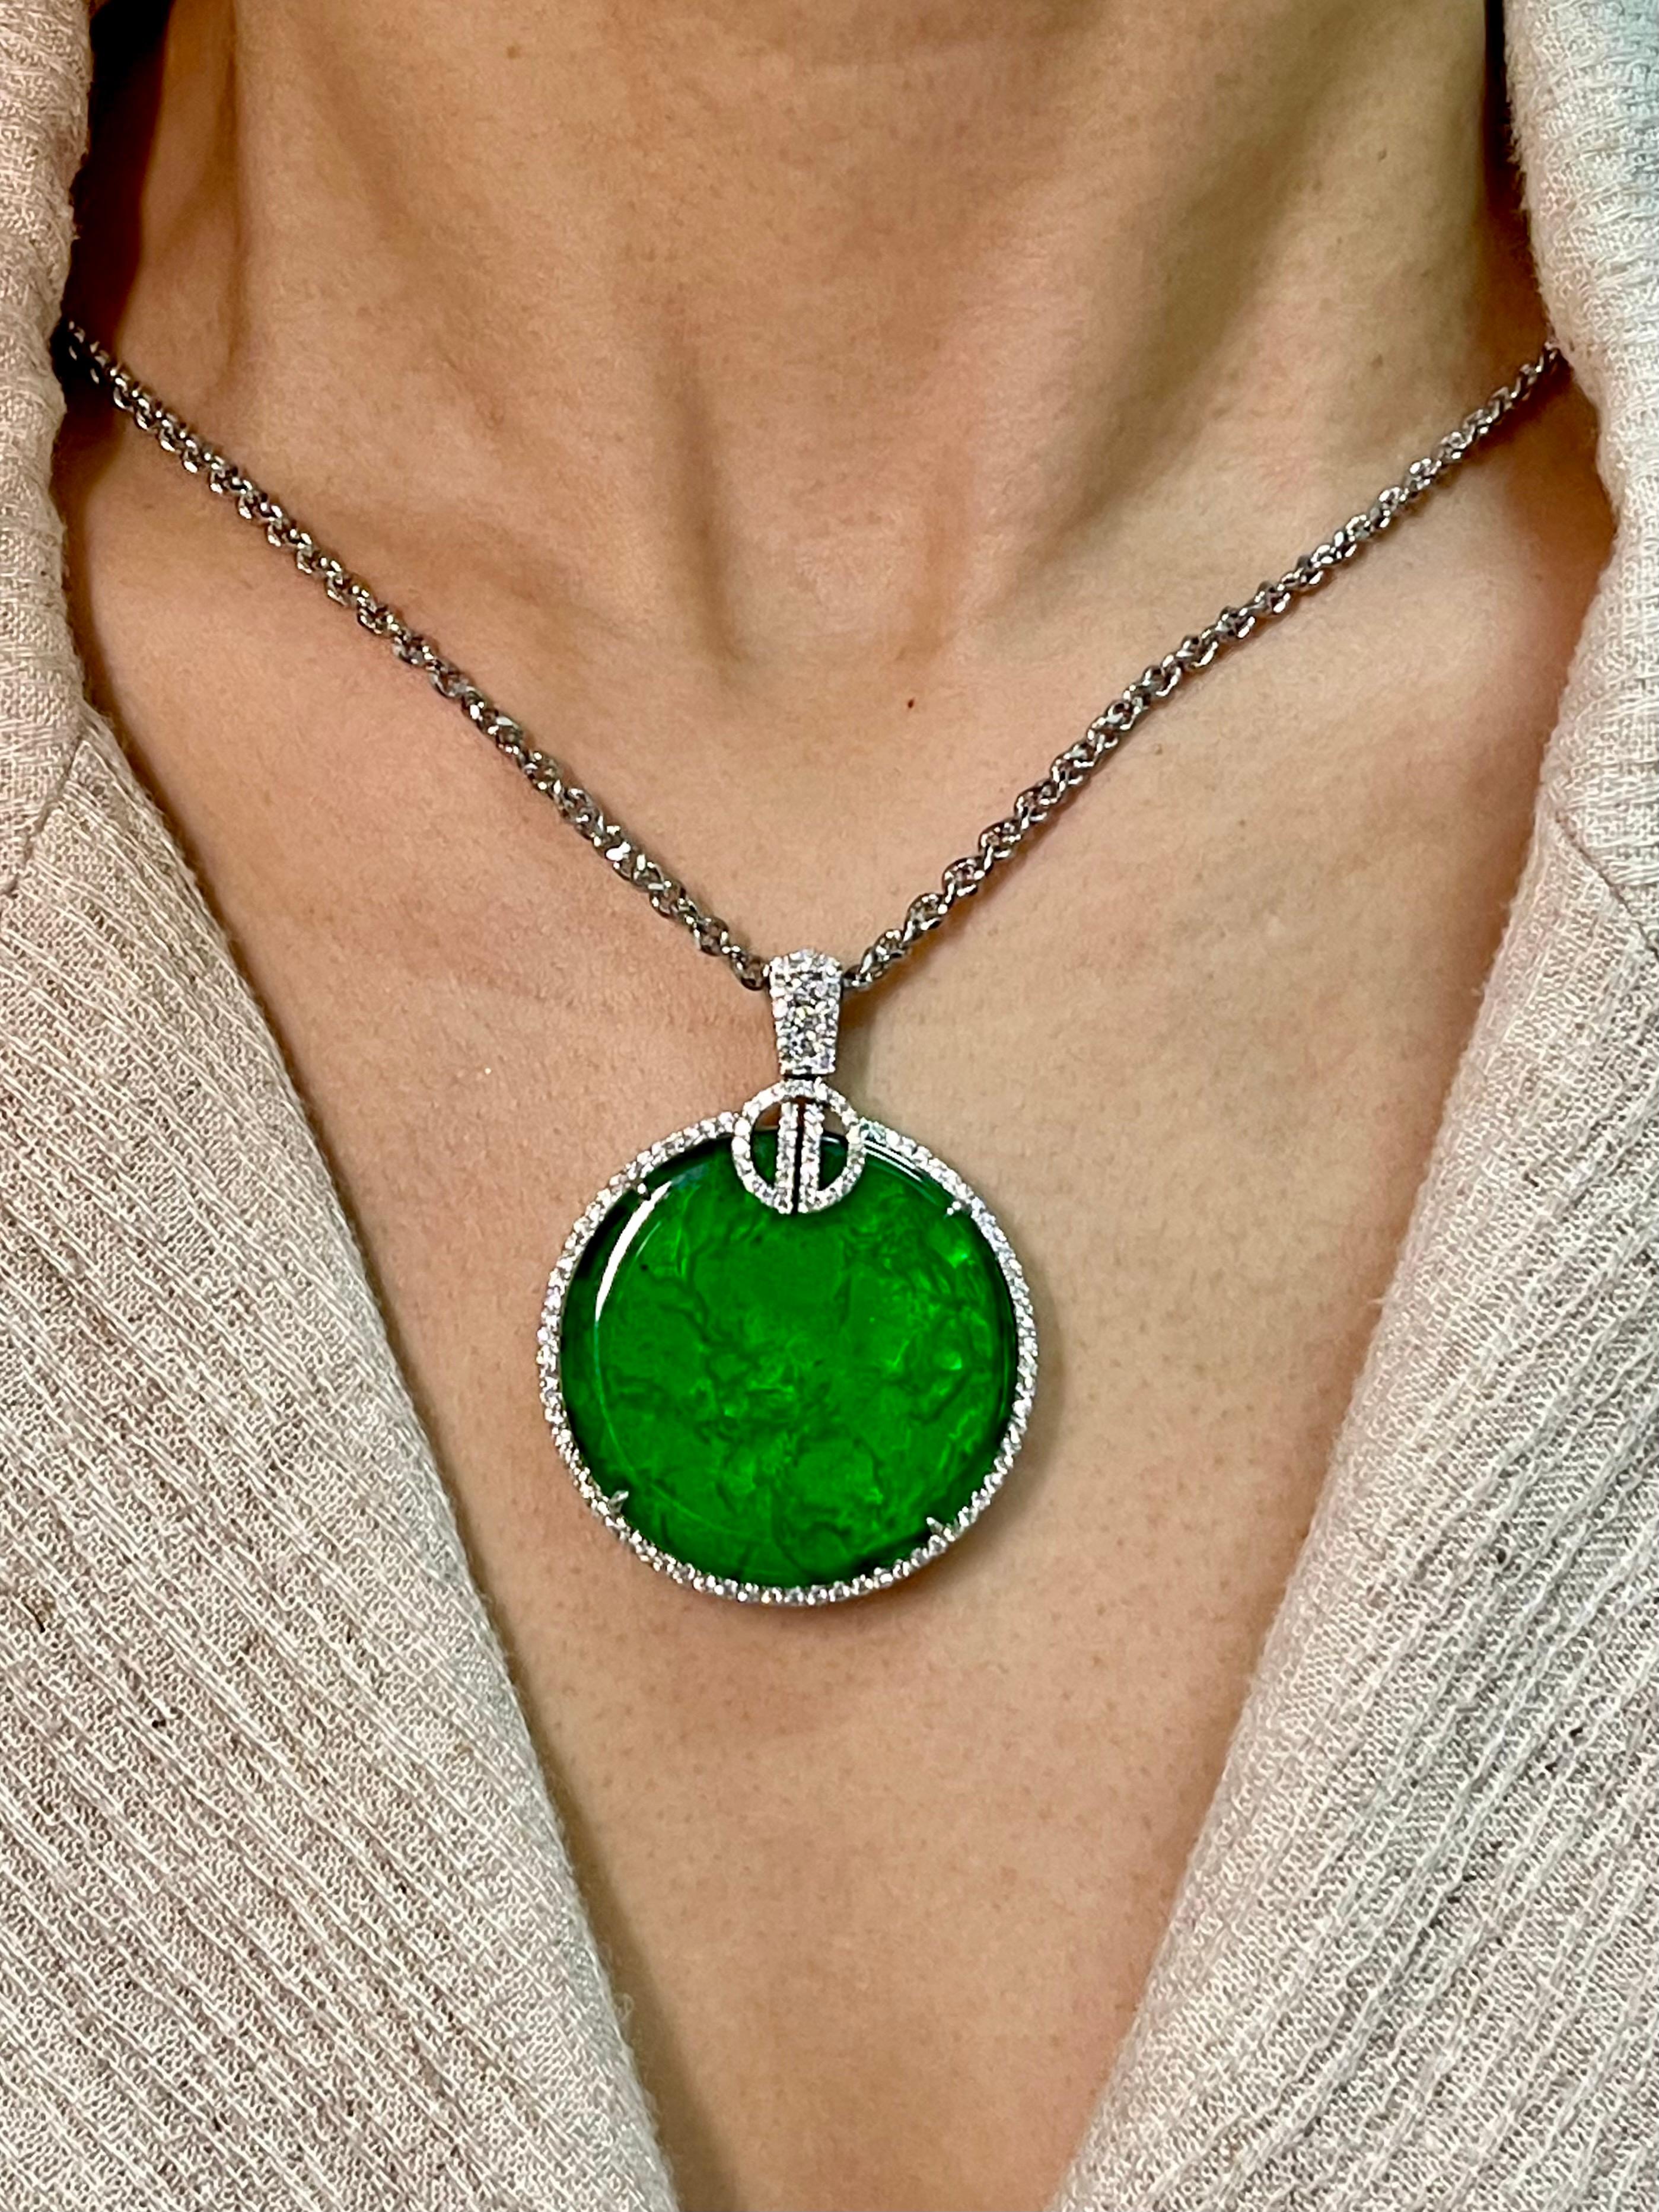 This is a collector's item! This certified natural jadeite jade is with no treatment and un-enhanced. The pendant is set in 18k white gold and diamonds. There are 1.08cts of white diamonds in this pendant. The 